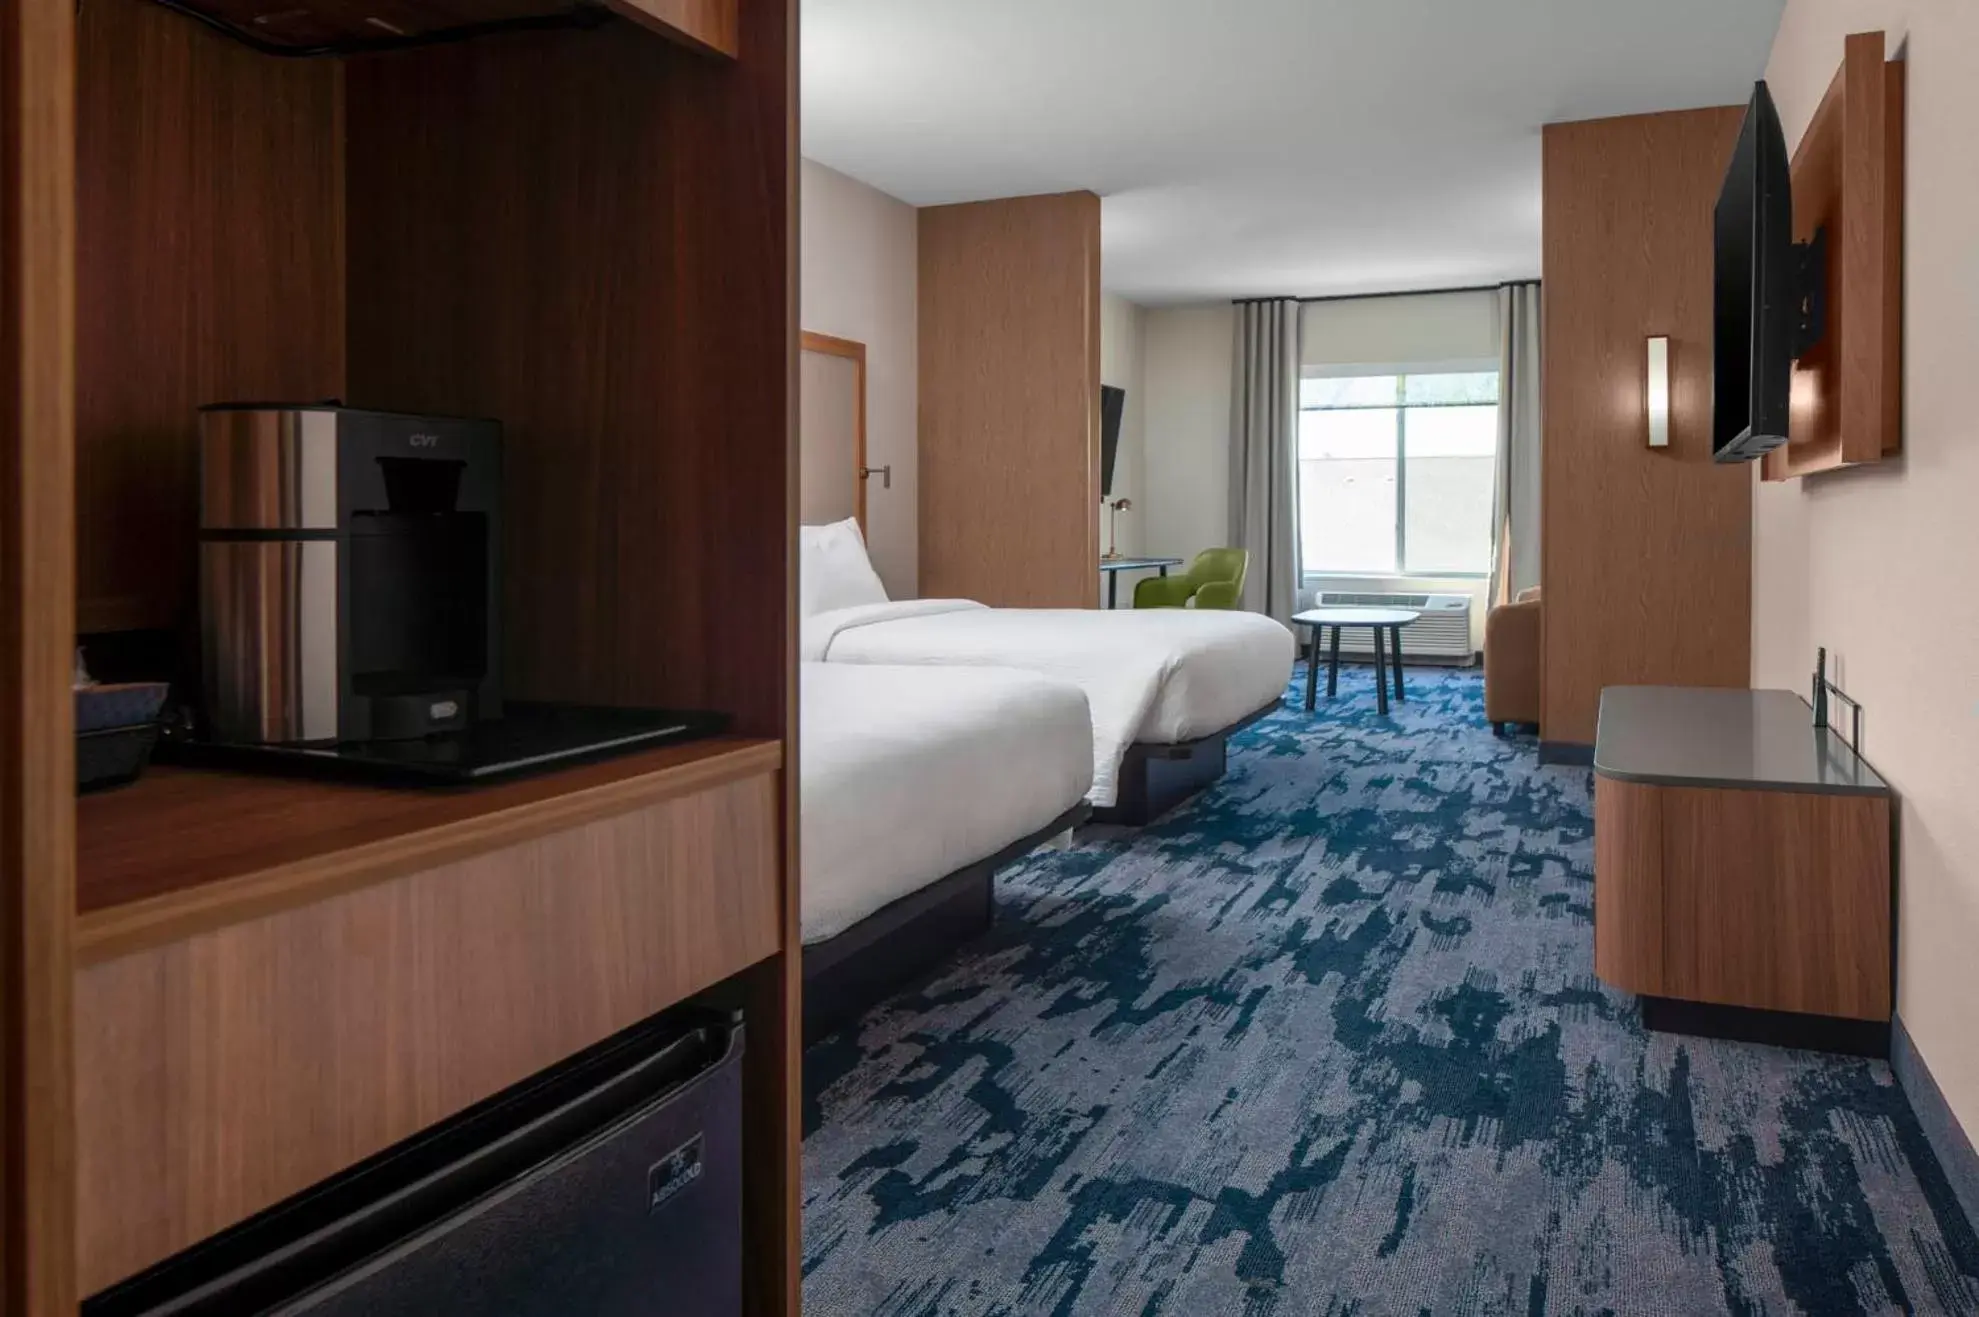 Fairfield by Marriott Inn & Suites Dallas DFW Airport North, Irving